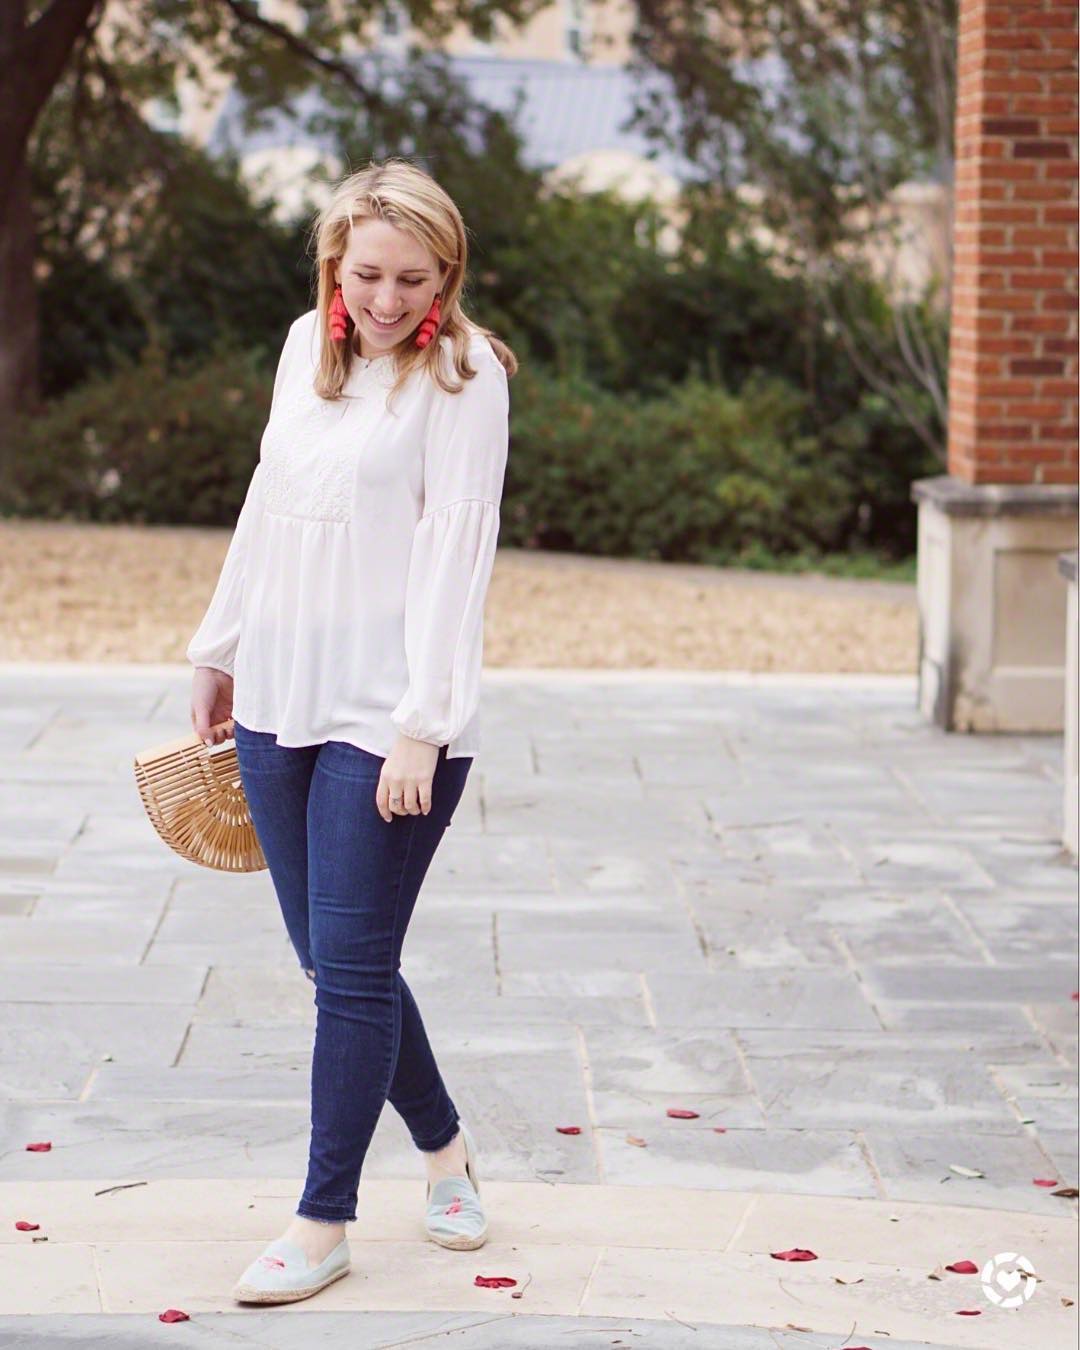 Adorable White Top With Denim Jeans And Flats